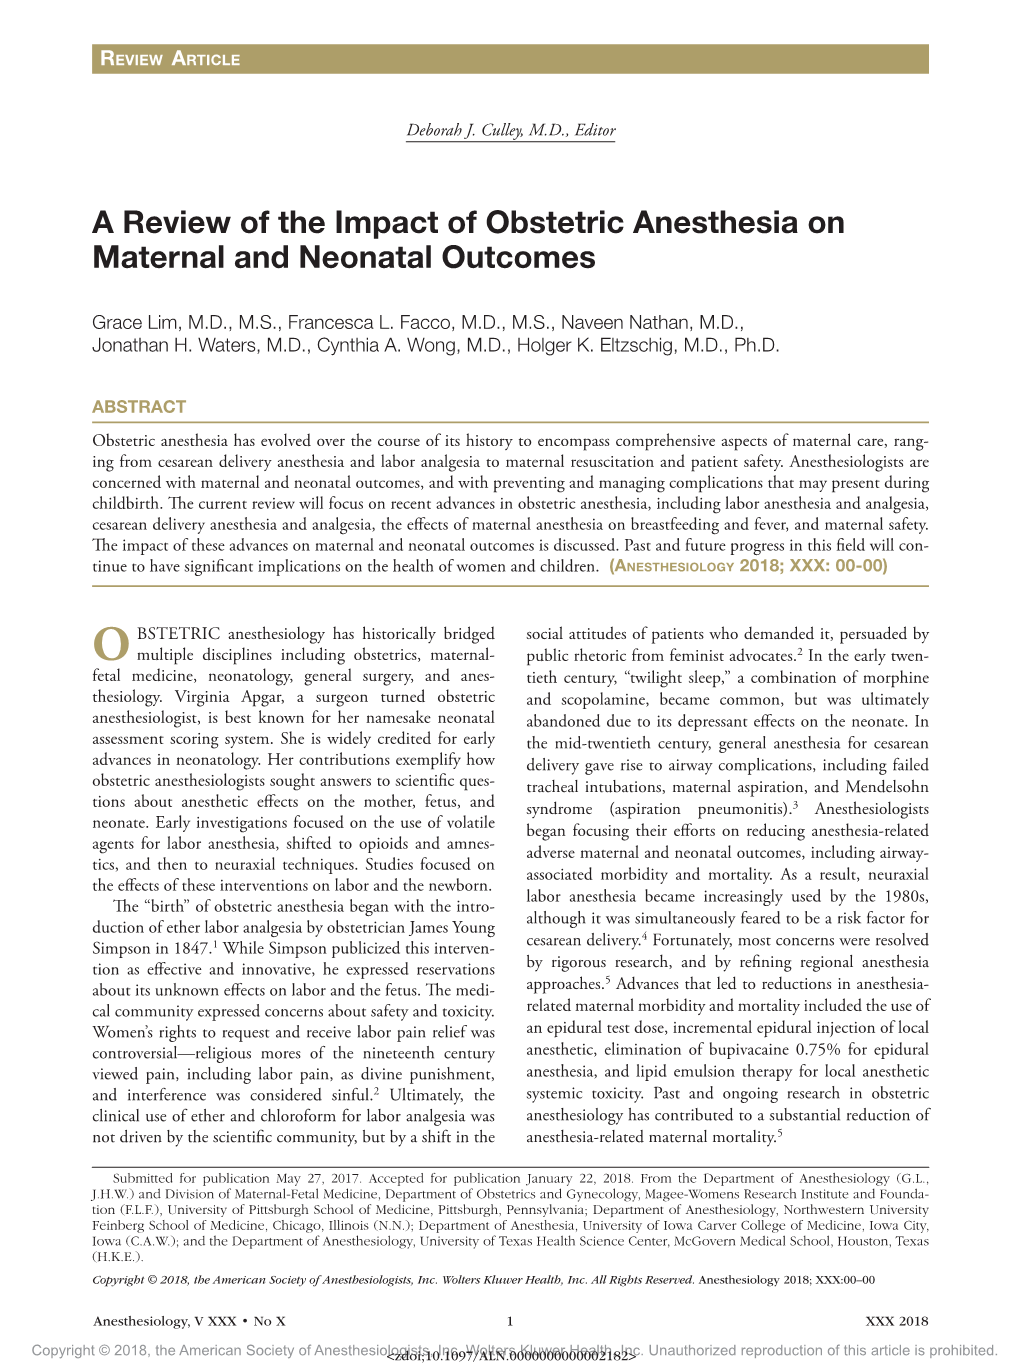 A Review of the Impact of Obstetric Anesthesia on Maternal and Neonatal Outcomes